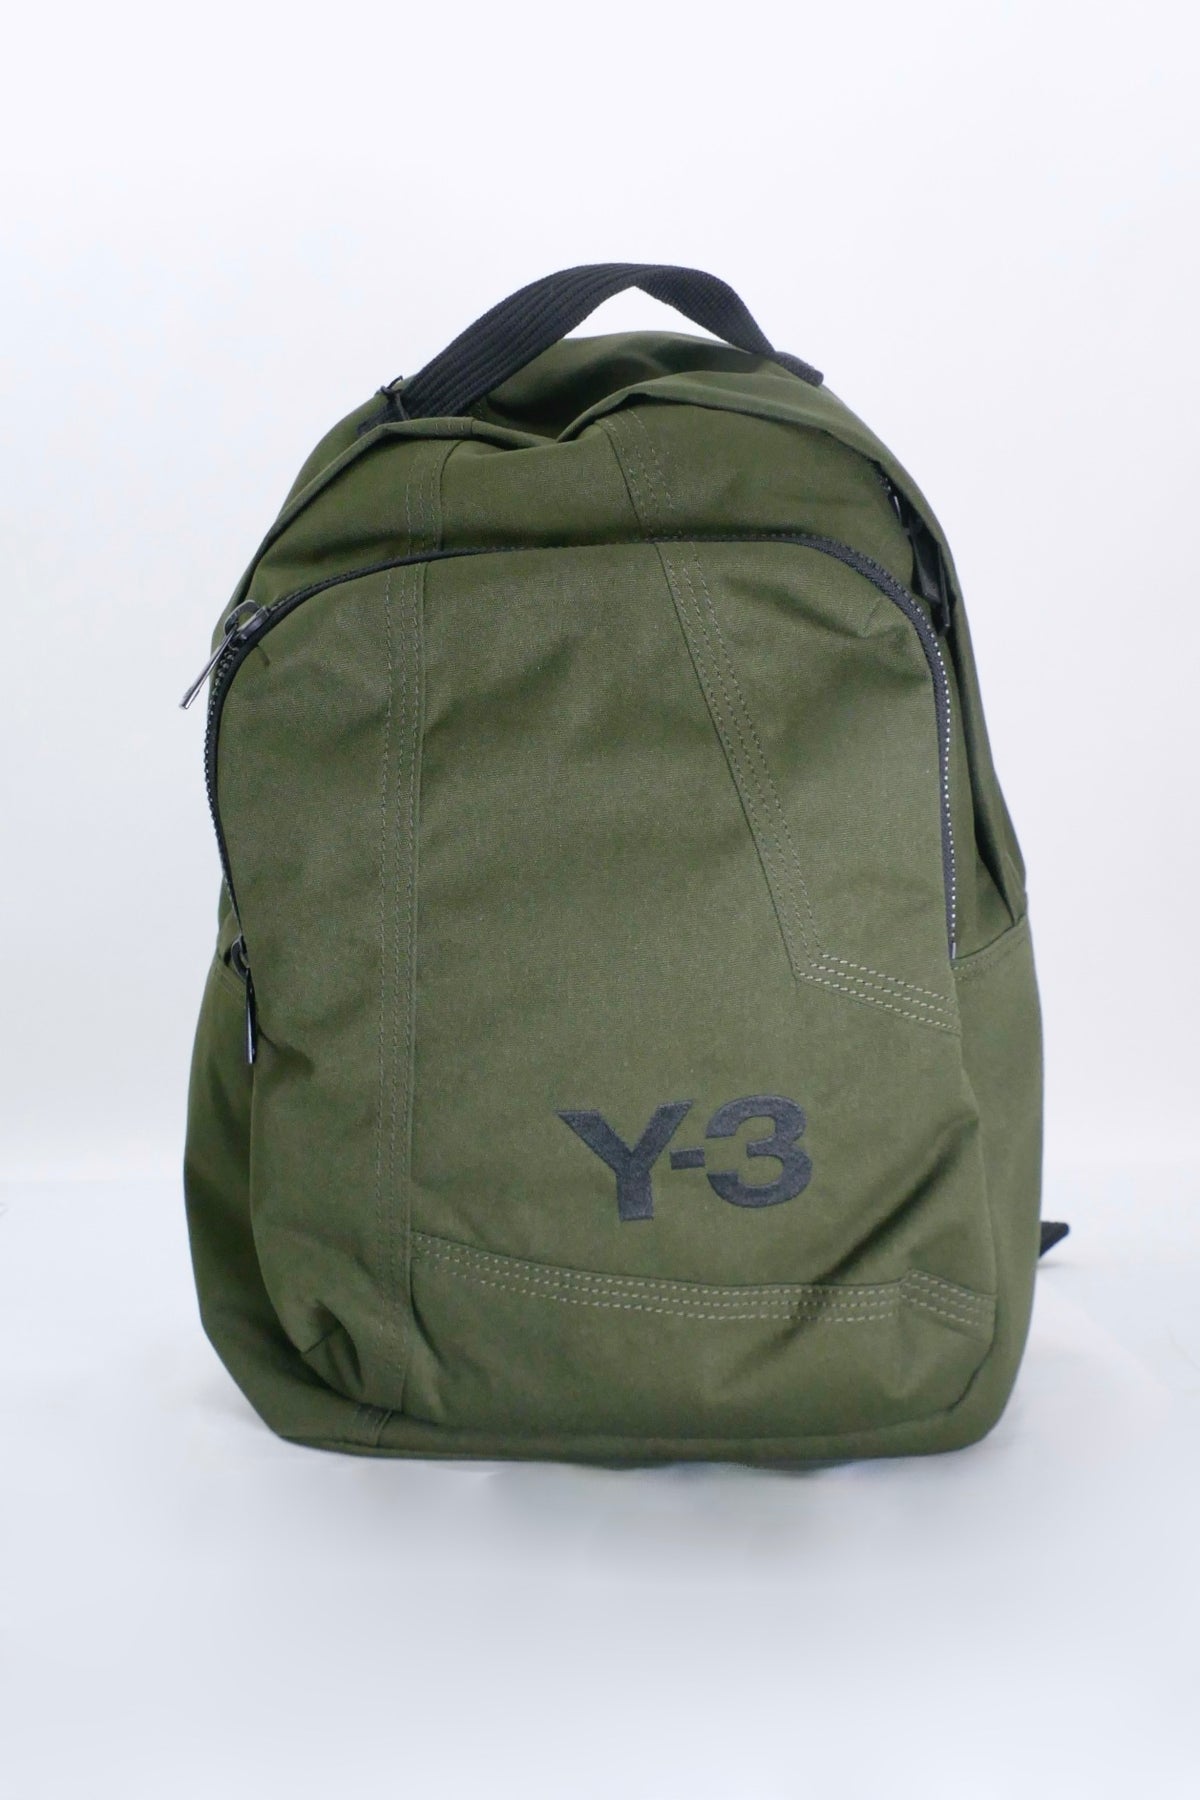 Y-3 Classic Backpack - Night Cargo